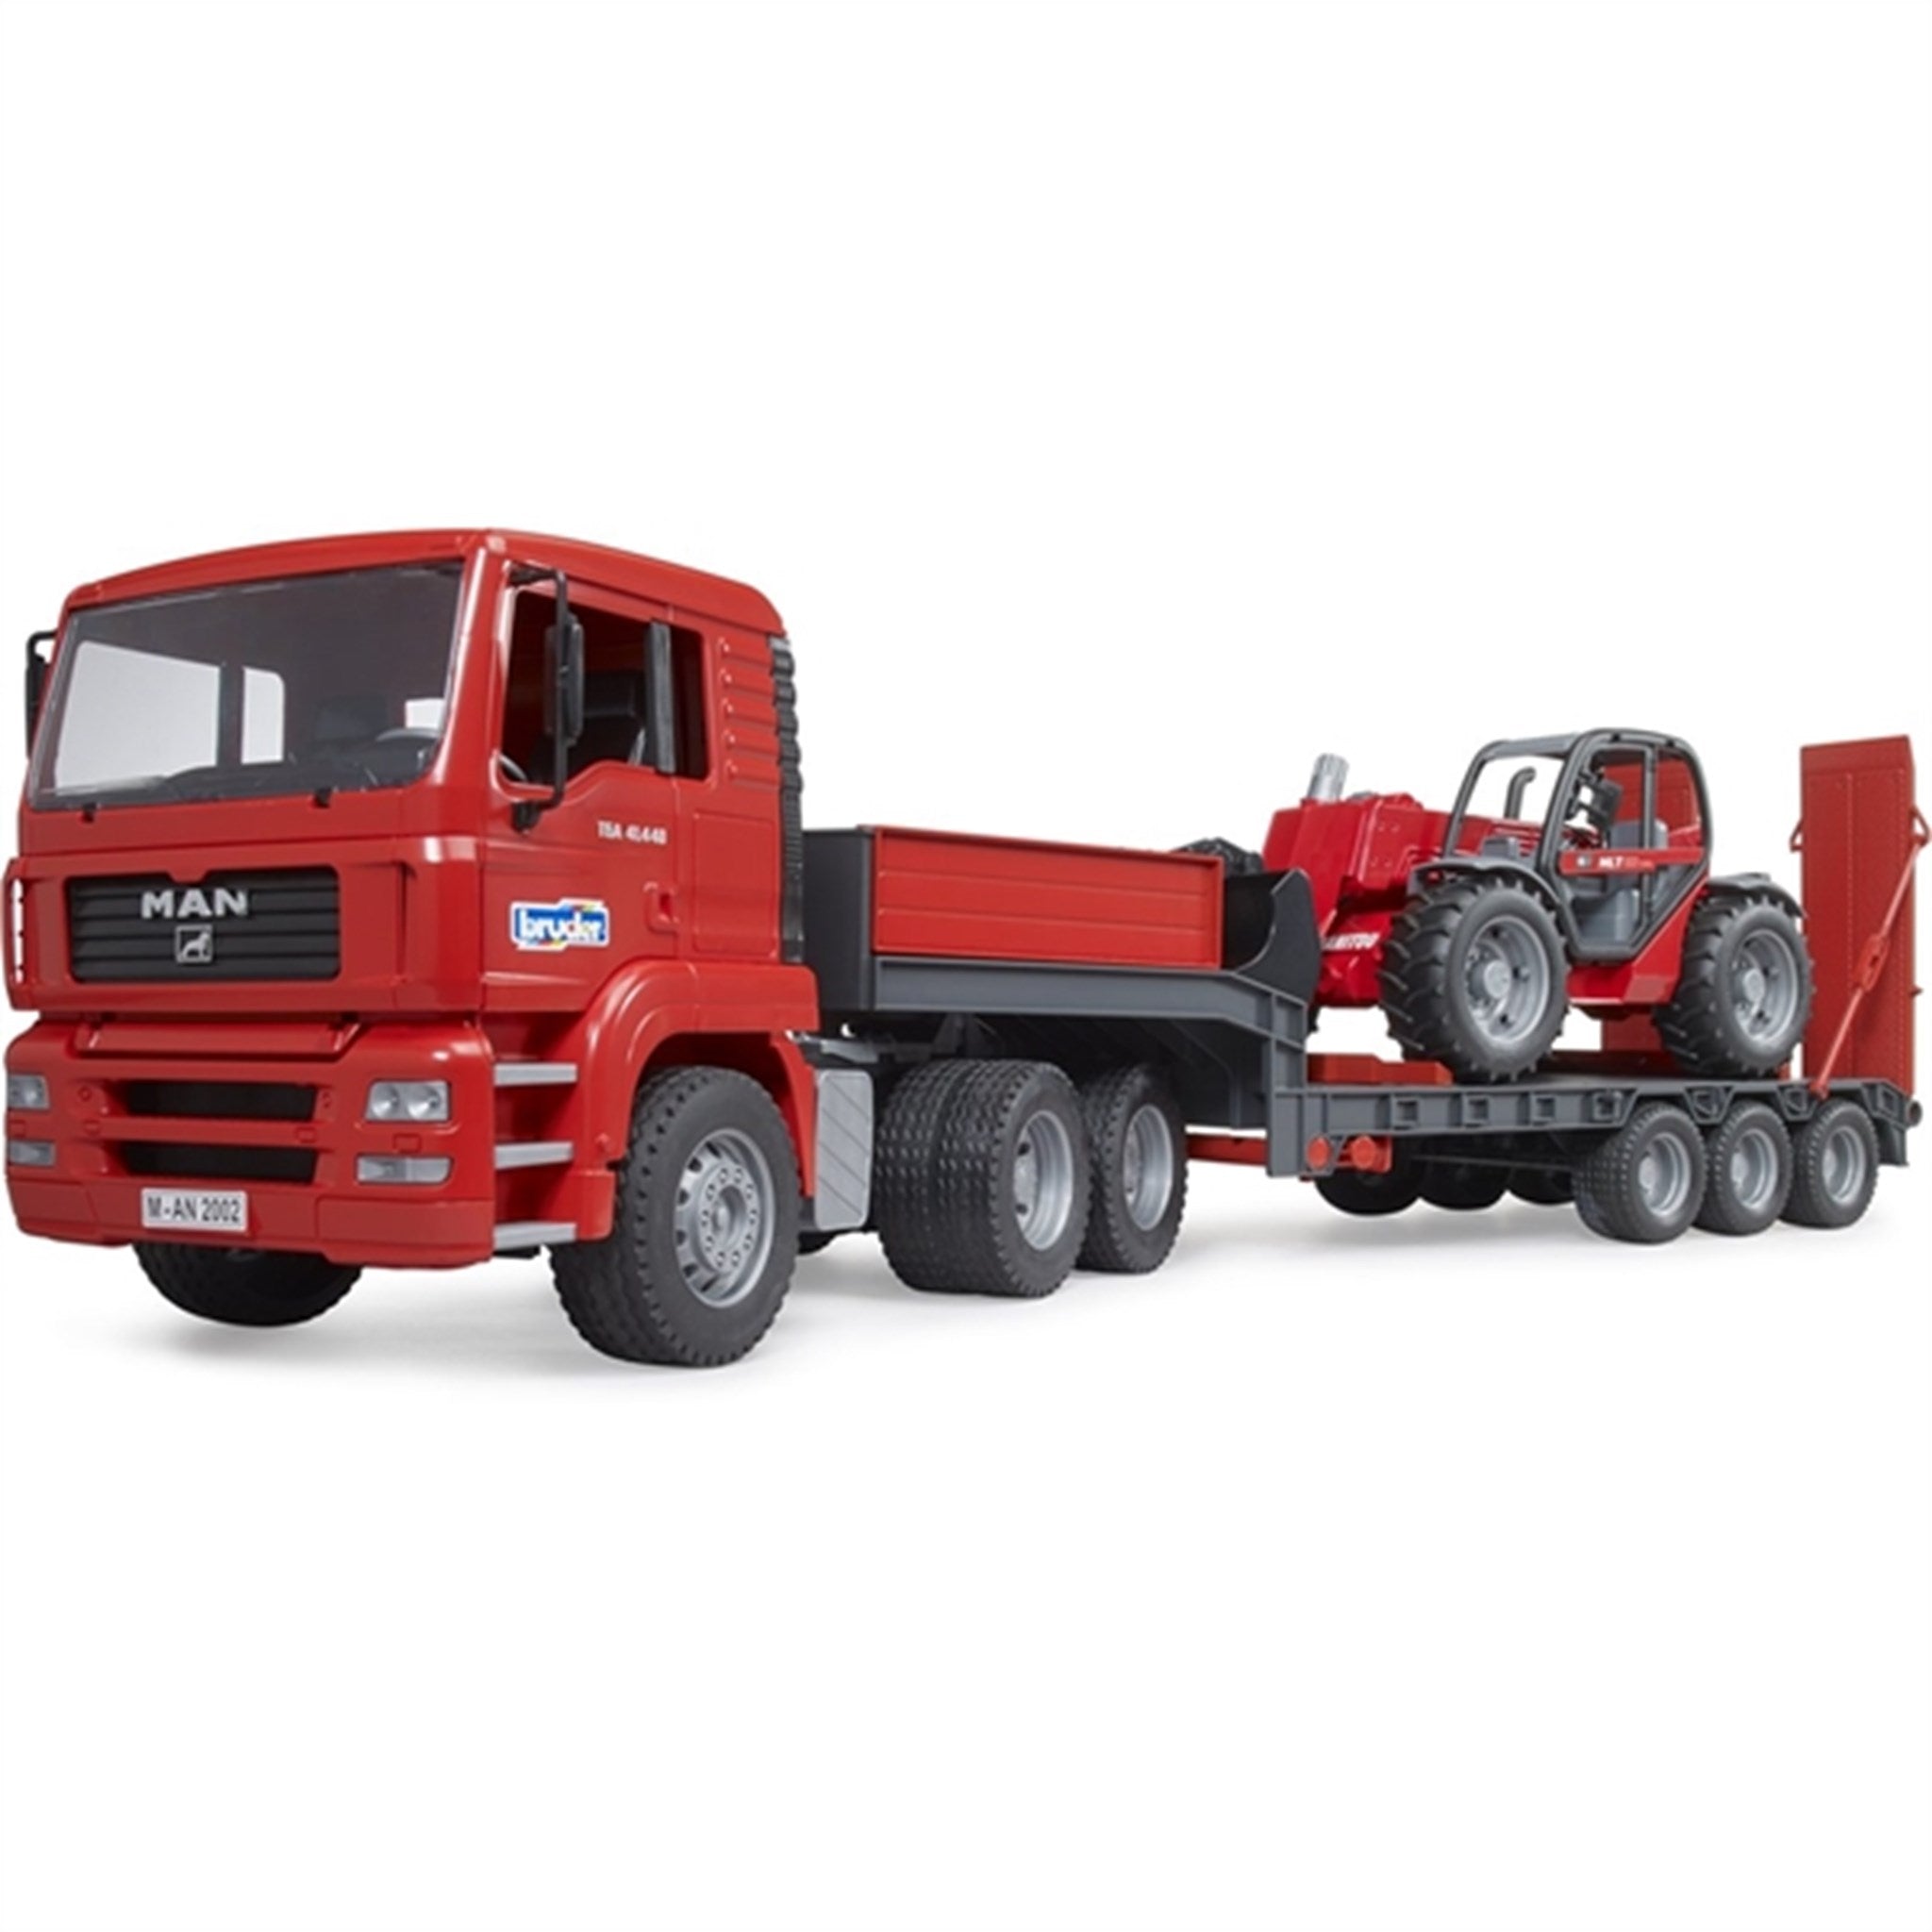 Bruder MAN TGA Low Loader Truck with Accessories 2